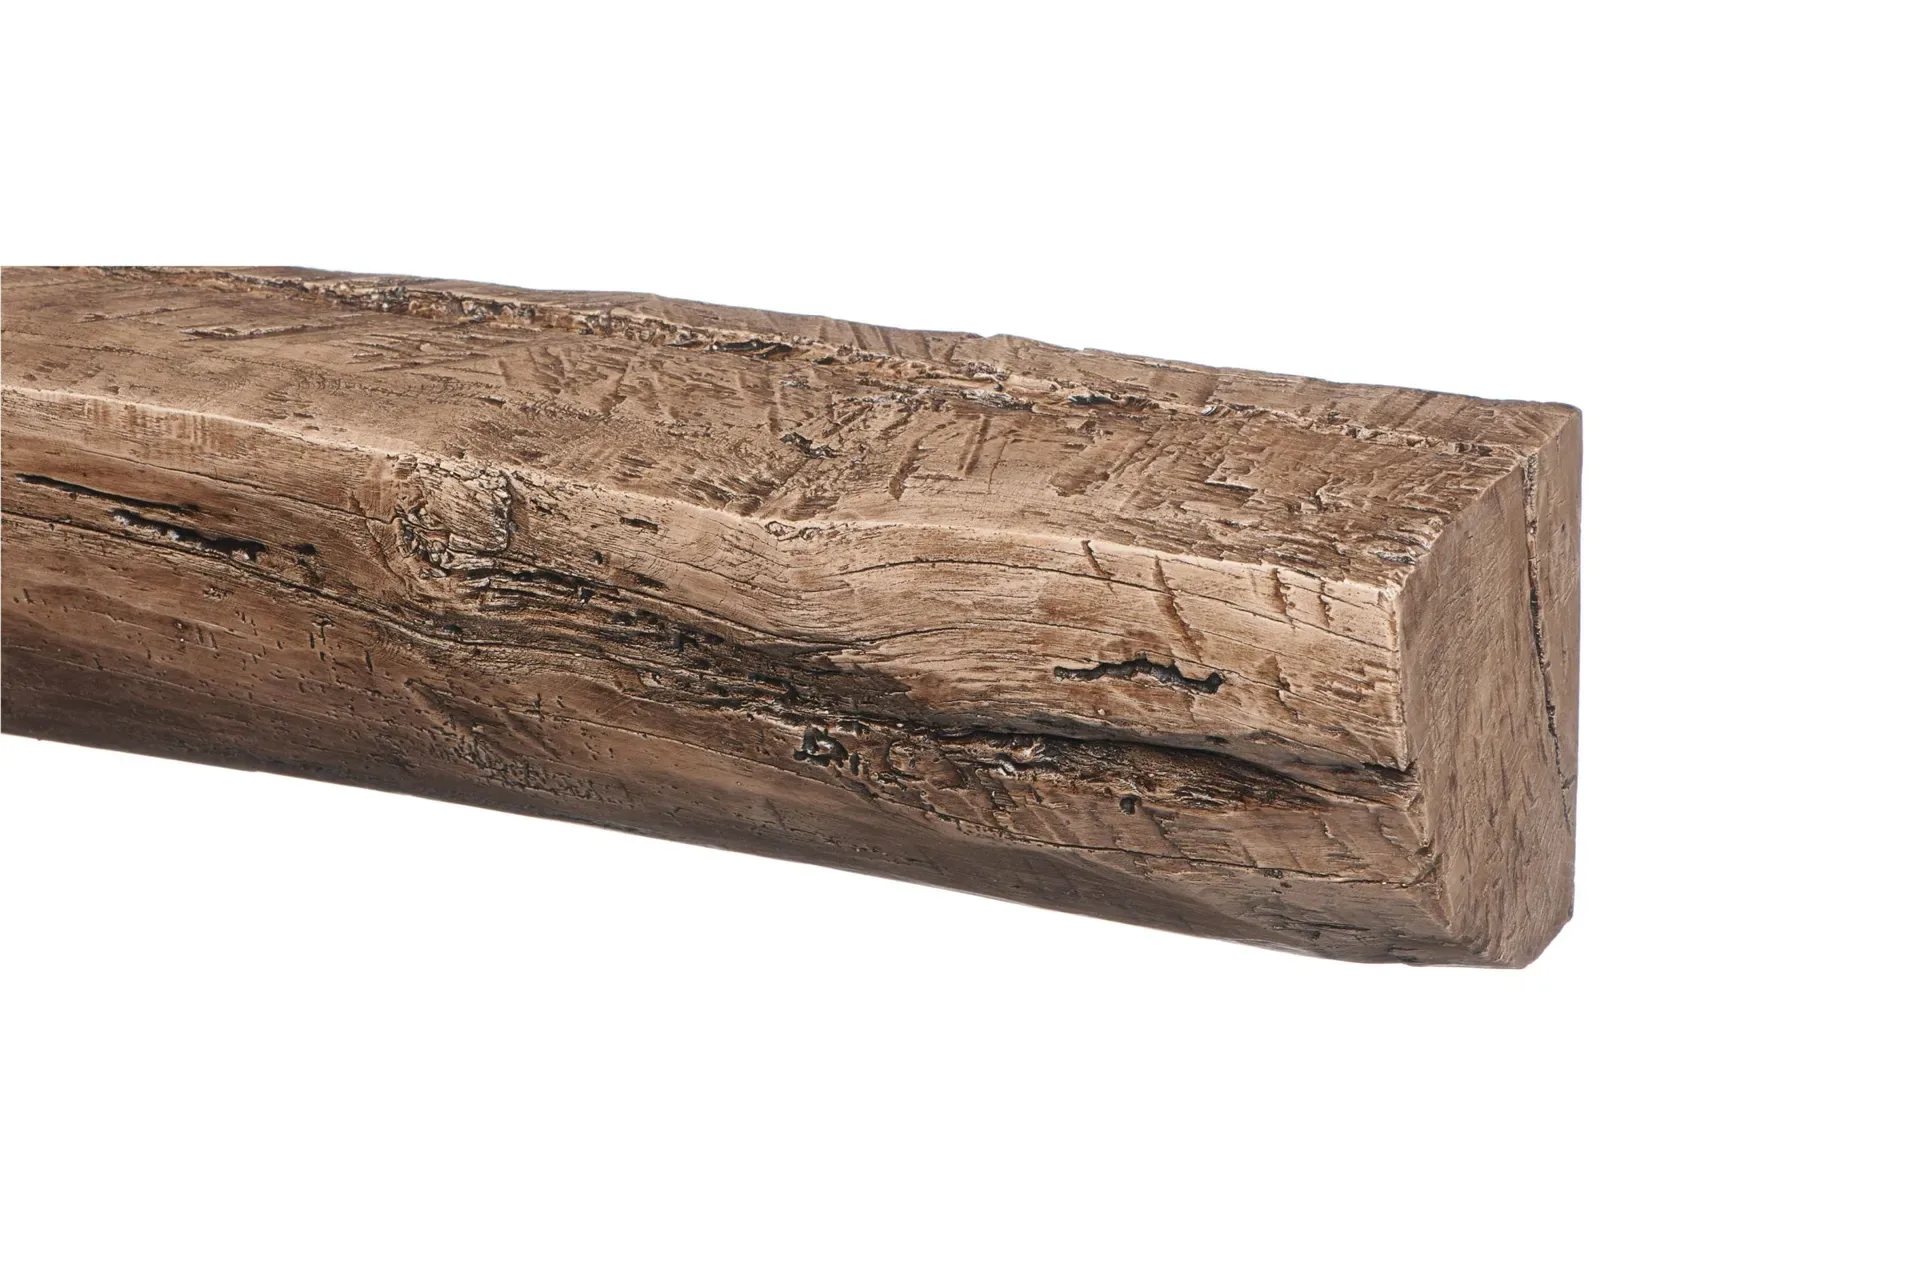 The gallery collection fireplace beam rustick natural oak